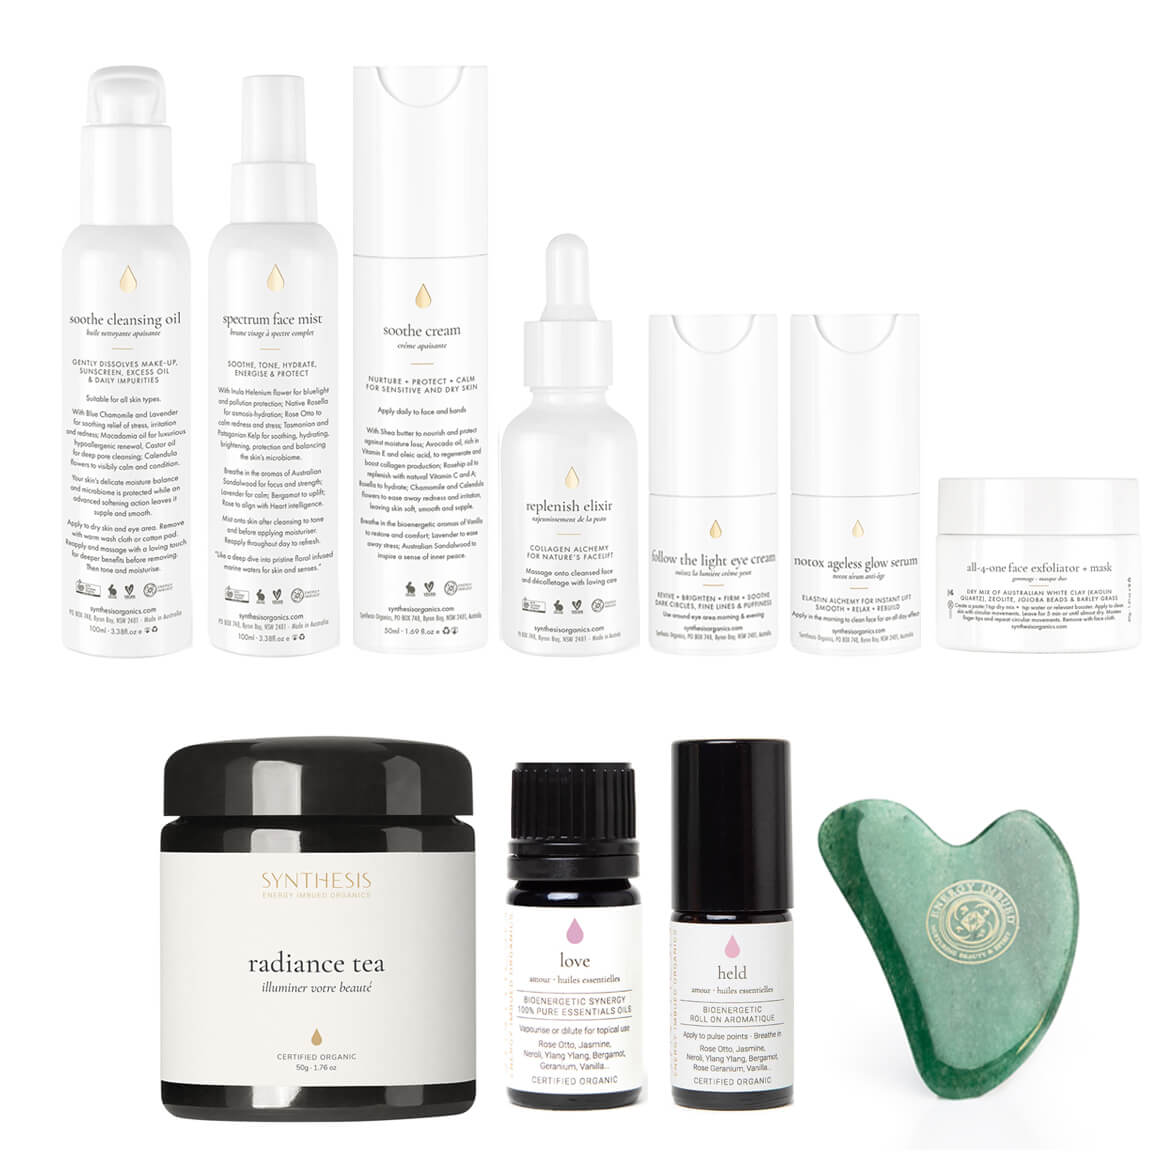 Collection 3: Bioenergetic Facial Collection Other Synthesis Organics With Replenish Elixir and Notox Ageless Glow Serum